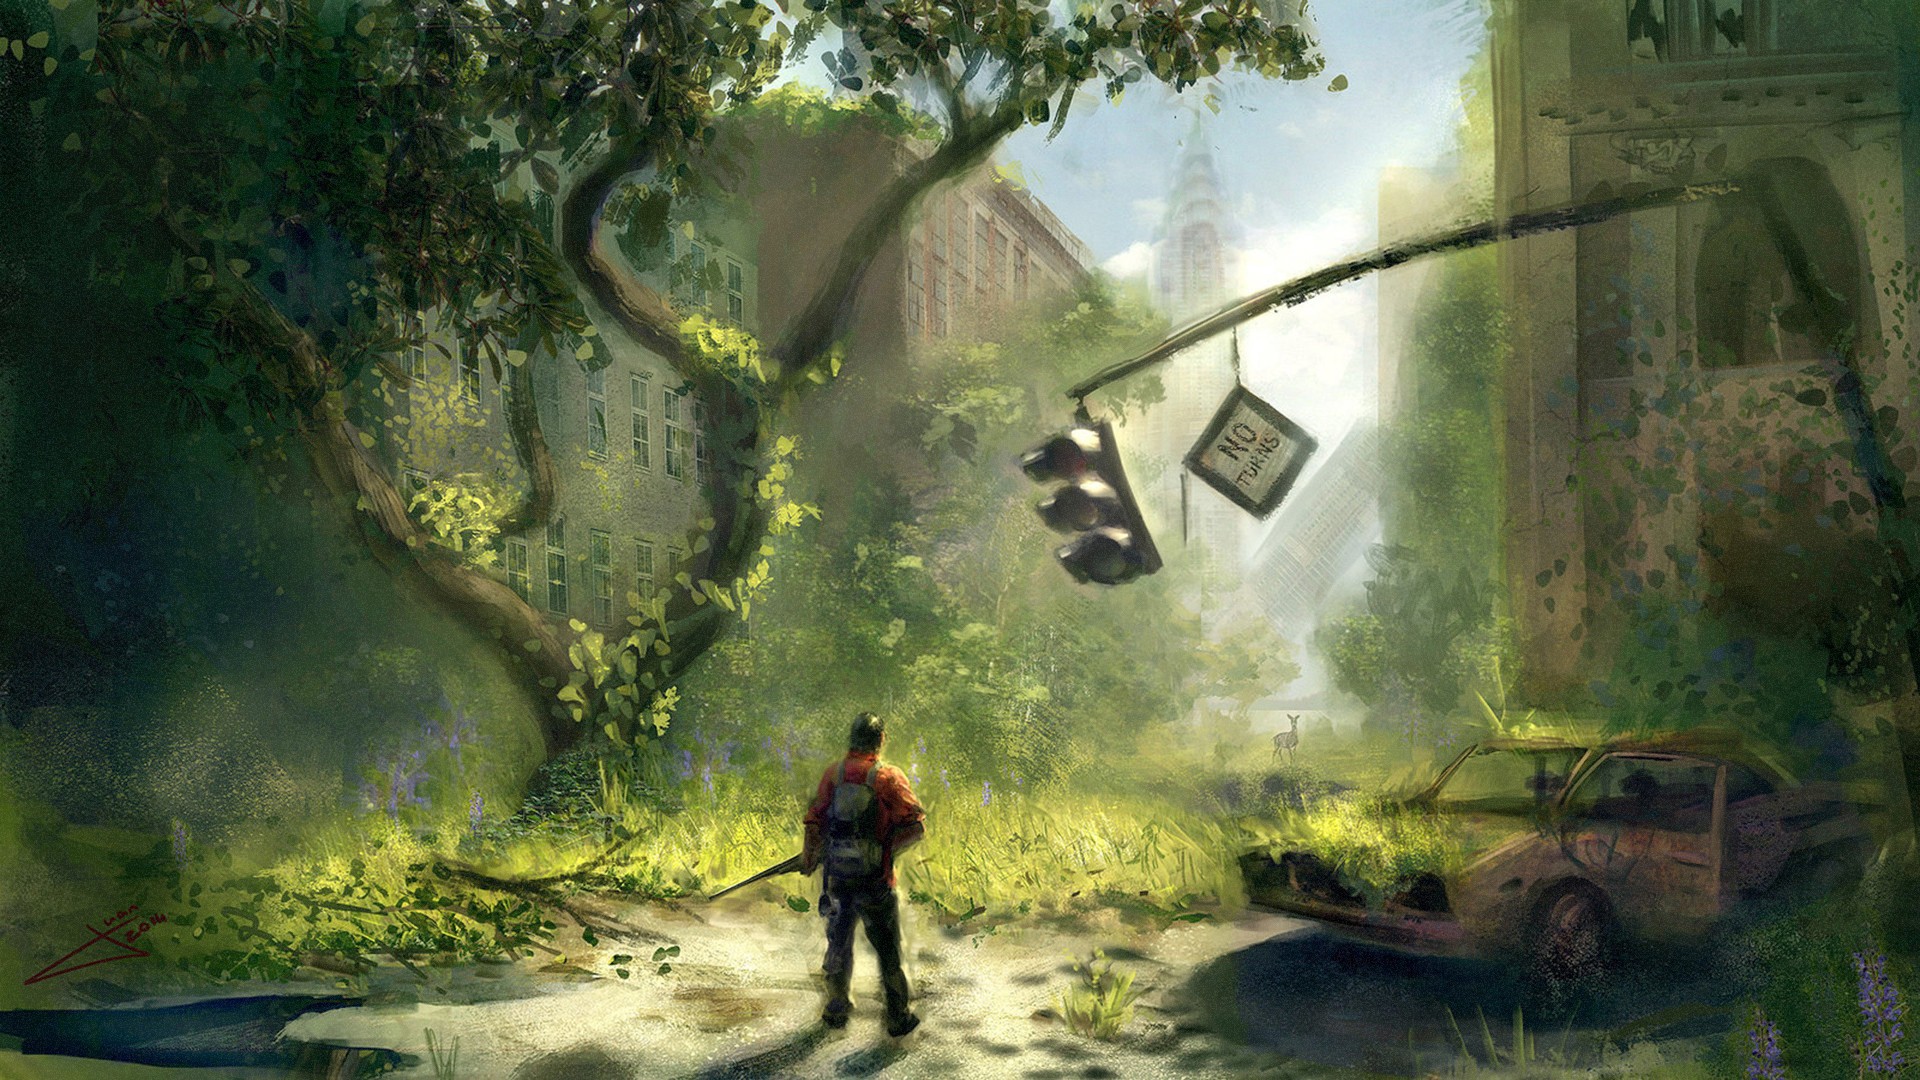 General 1920x1080 artwork apocalyptic The Last of Us video games video game art fan art car wreck traffic lights trees weapon ruins watermarked 2014 (Year)